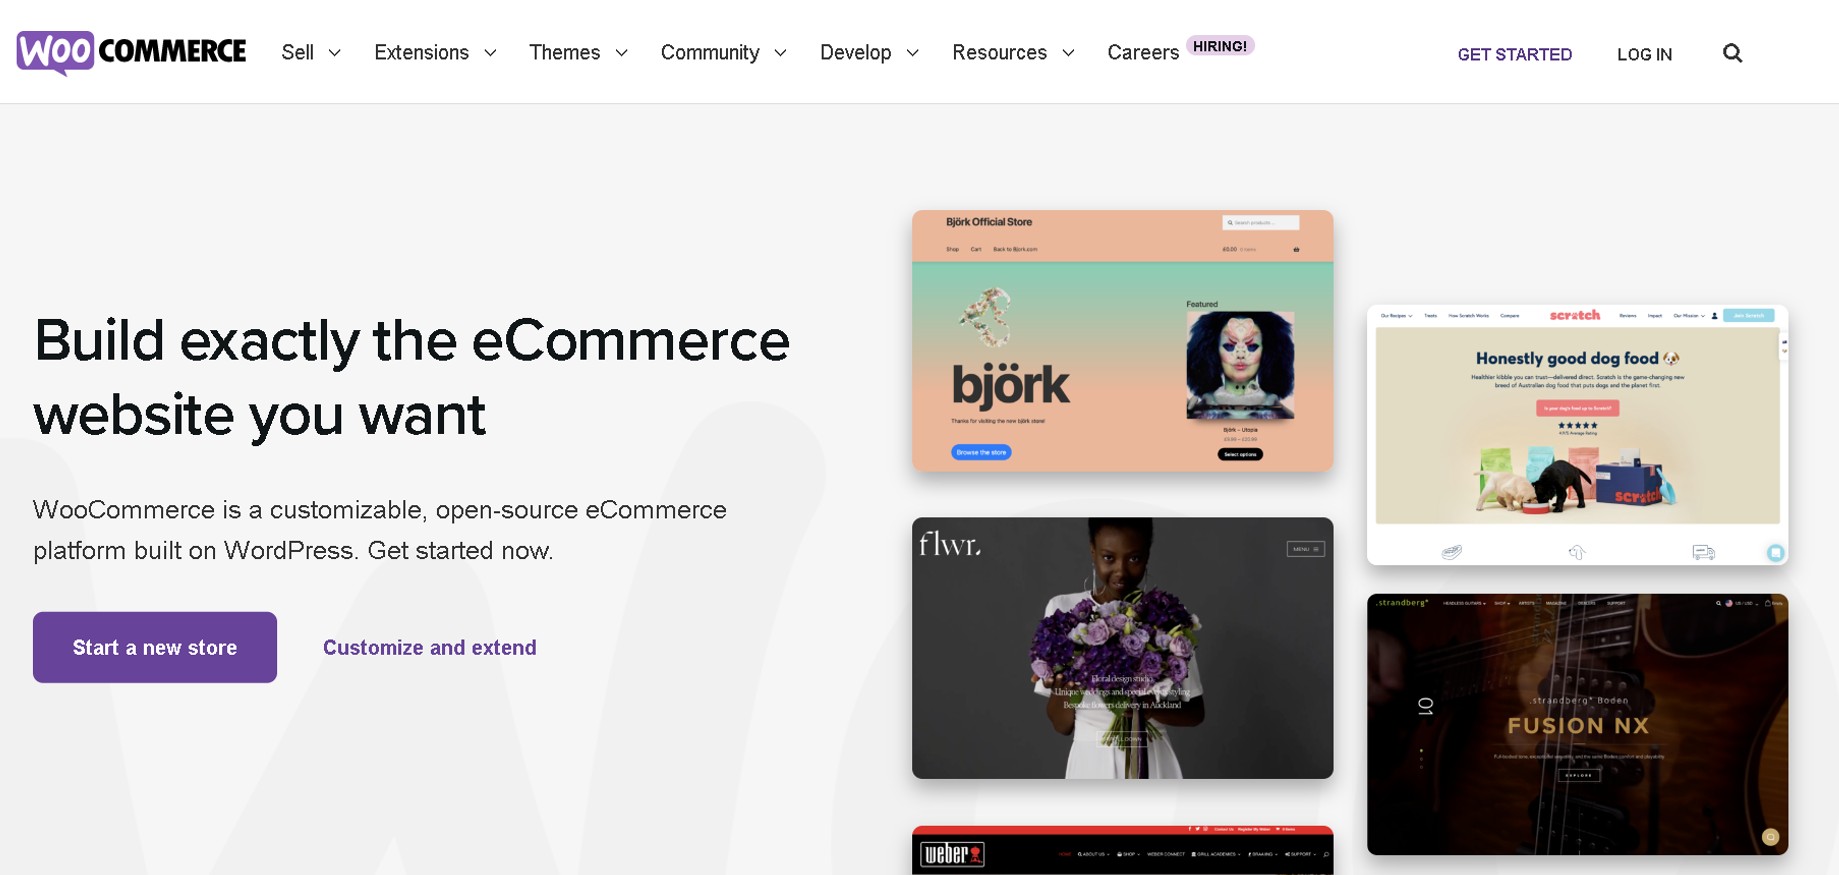 woocommerce pricing